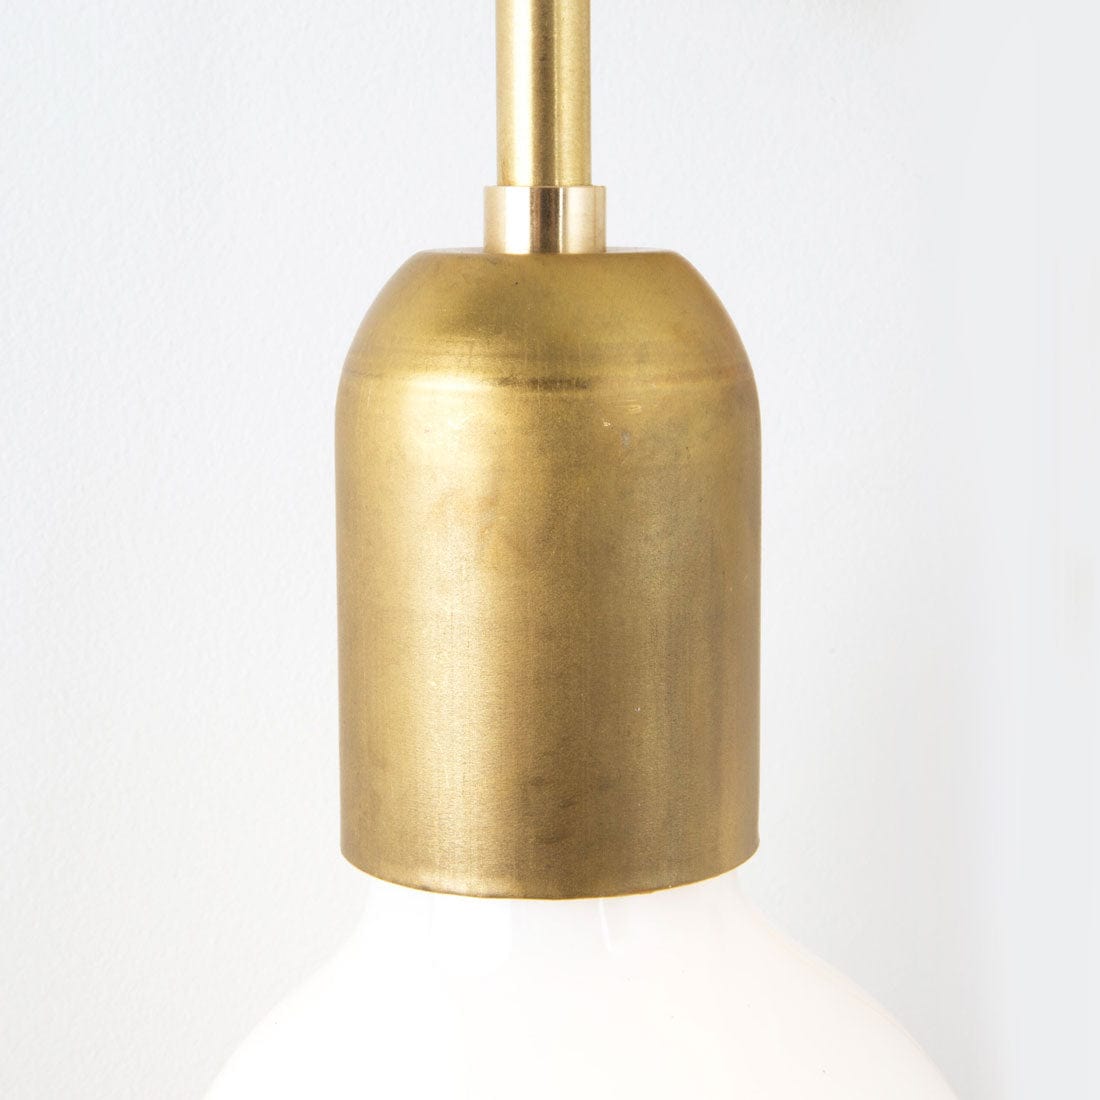 Customize: Bend Solo Sconce